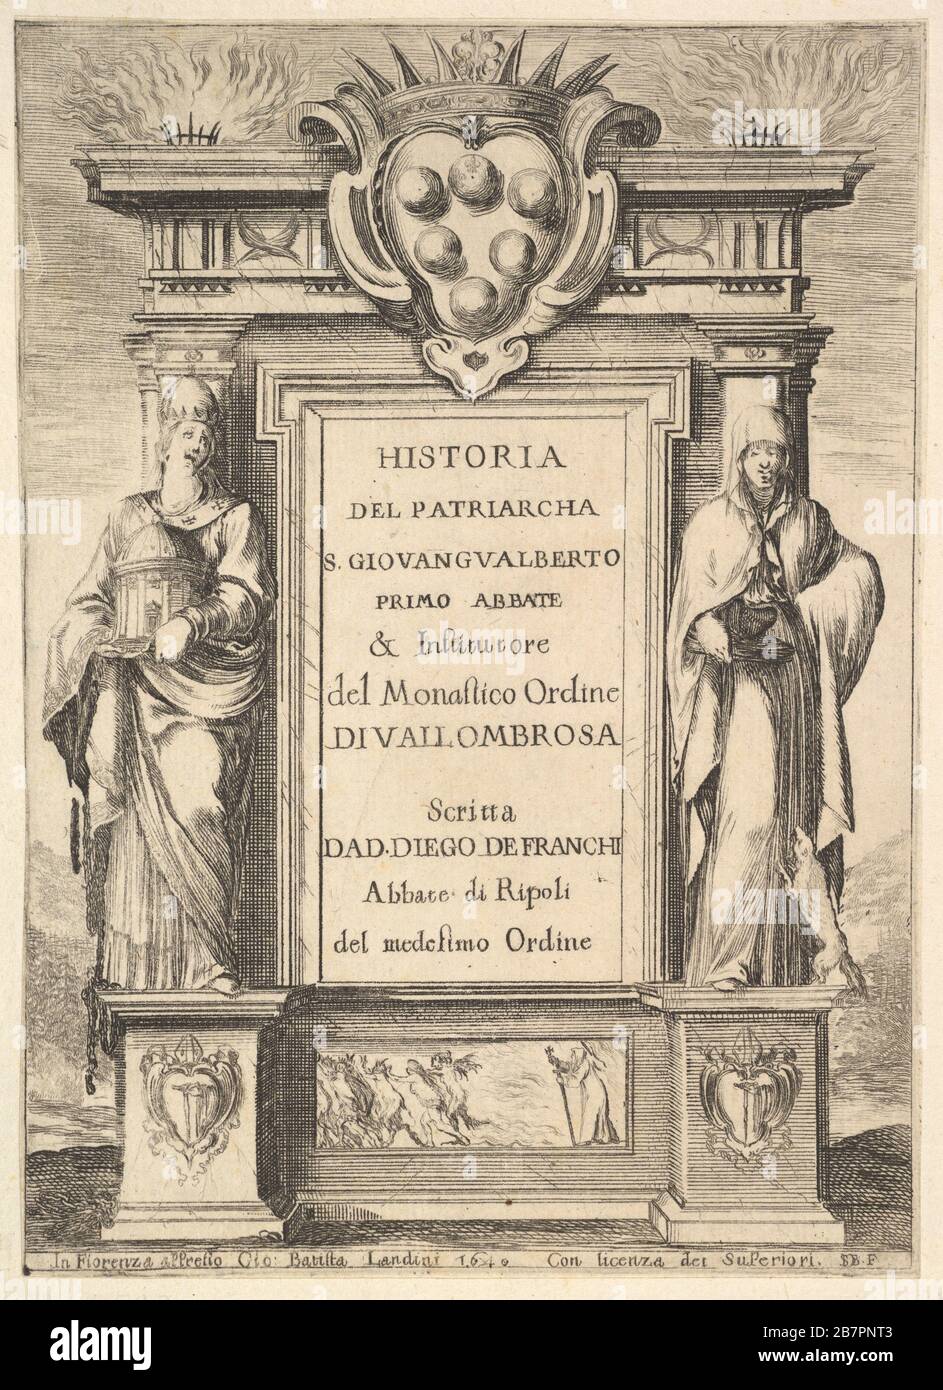 Frontispiece: a monument decorated with the Medici coat of arms at top in center, flames at top to either side, a hooded figure on right side of monument with a weasel below, a figure to left side wearing a papal crown, a scene of a monk chasing away demons with a cross on base of monument, from 'Frontispiece and four scenes from the life of Saint John Gualbert' (Frontispice et quatre vignettes pour une vie de Saint Jean Gualbert), 1640. Stock Photo